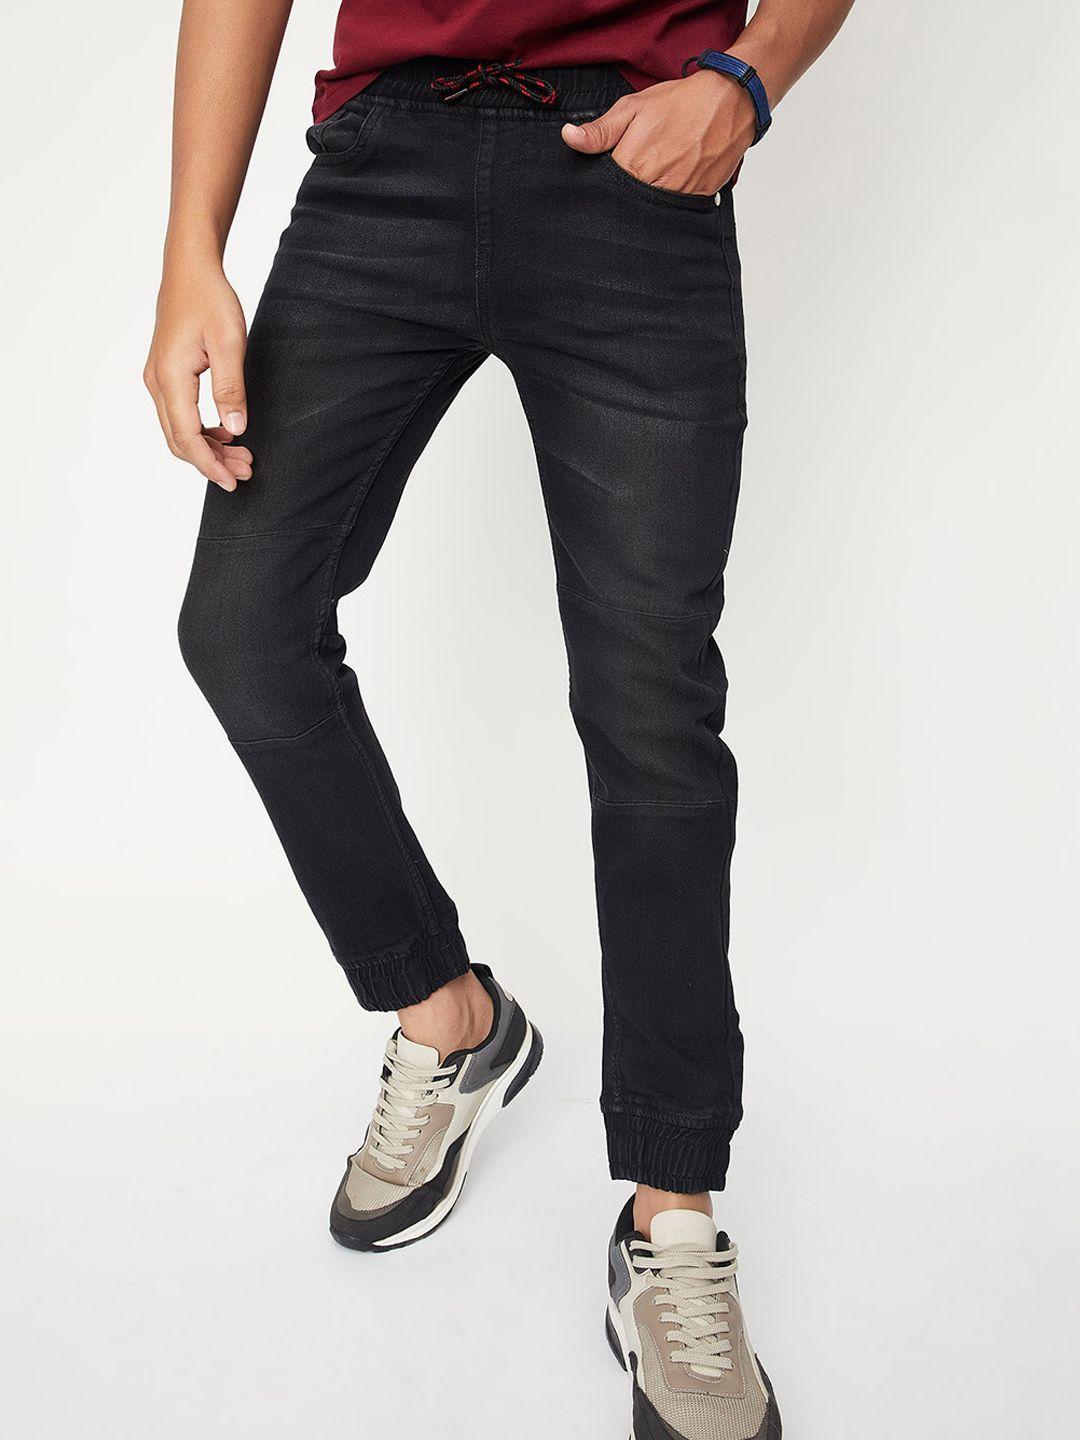 max Boys Regular Fit Mid-Rise Jeans